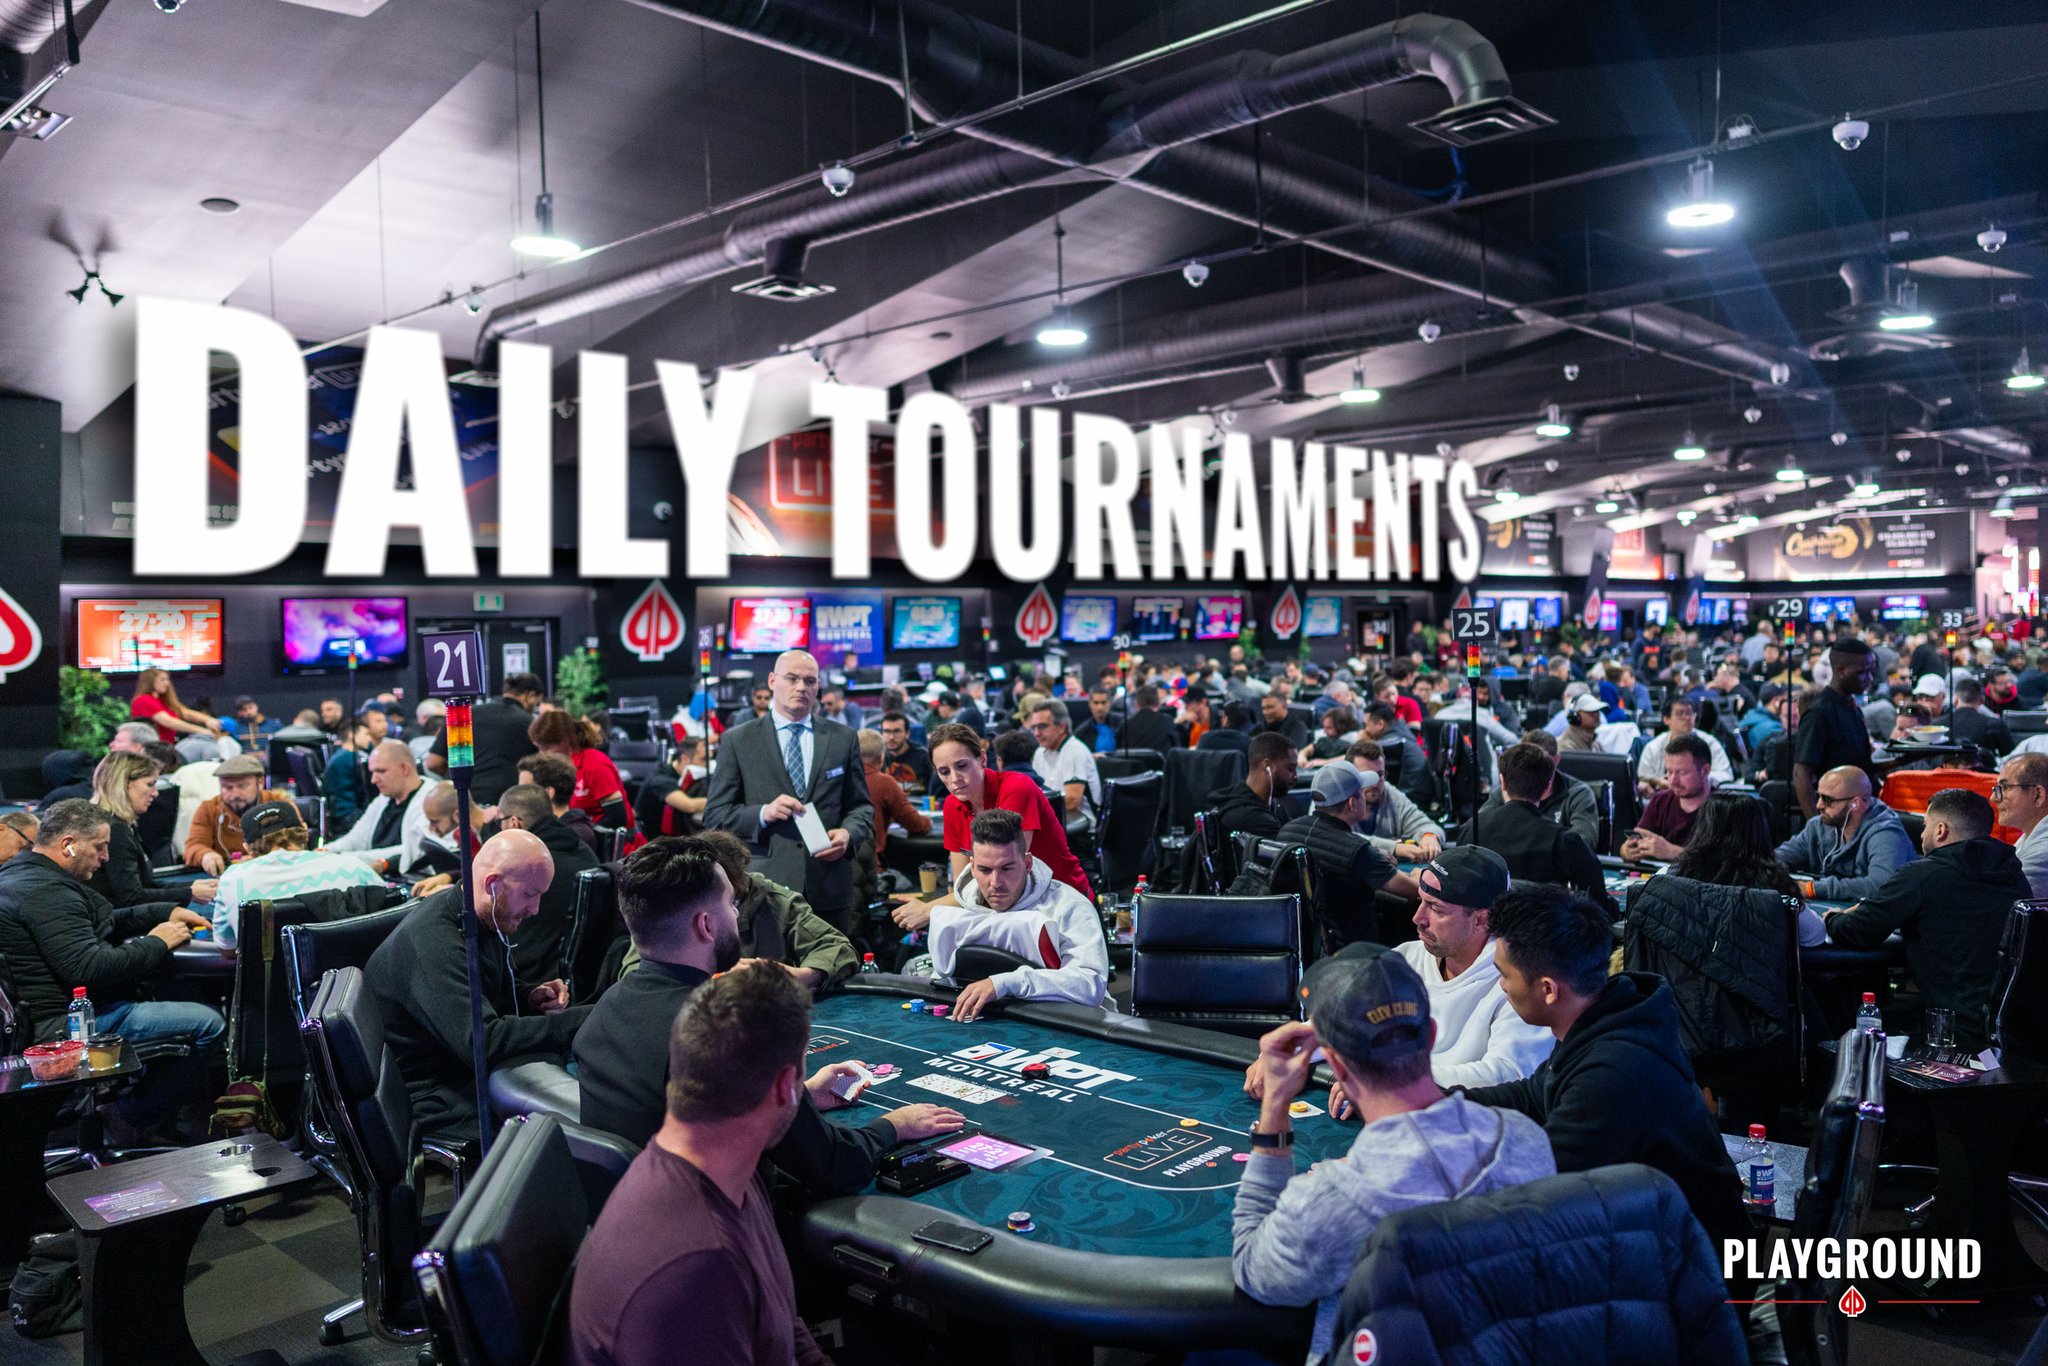 Playground Poker on Twitter "The tournaments never stop at Playground